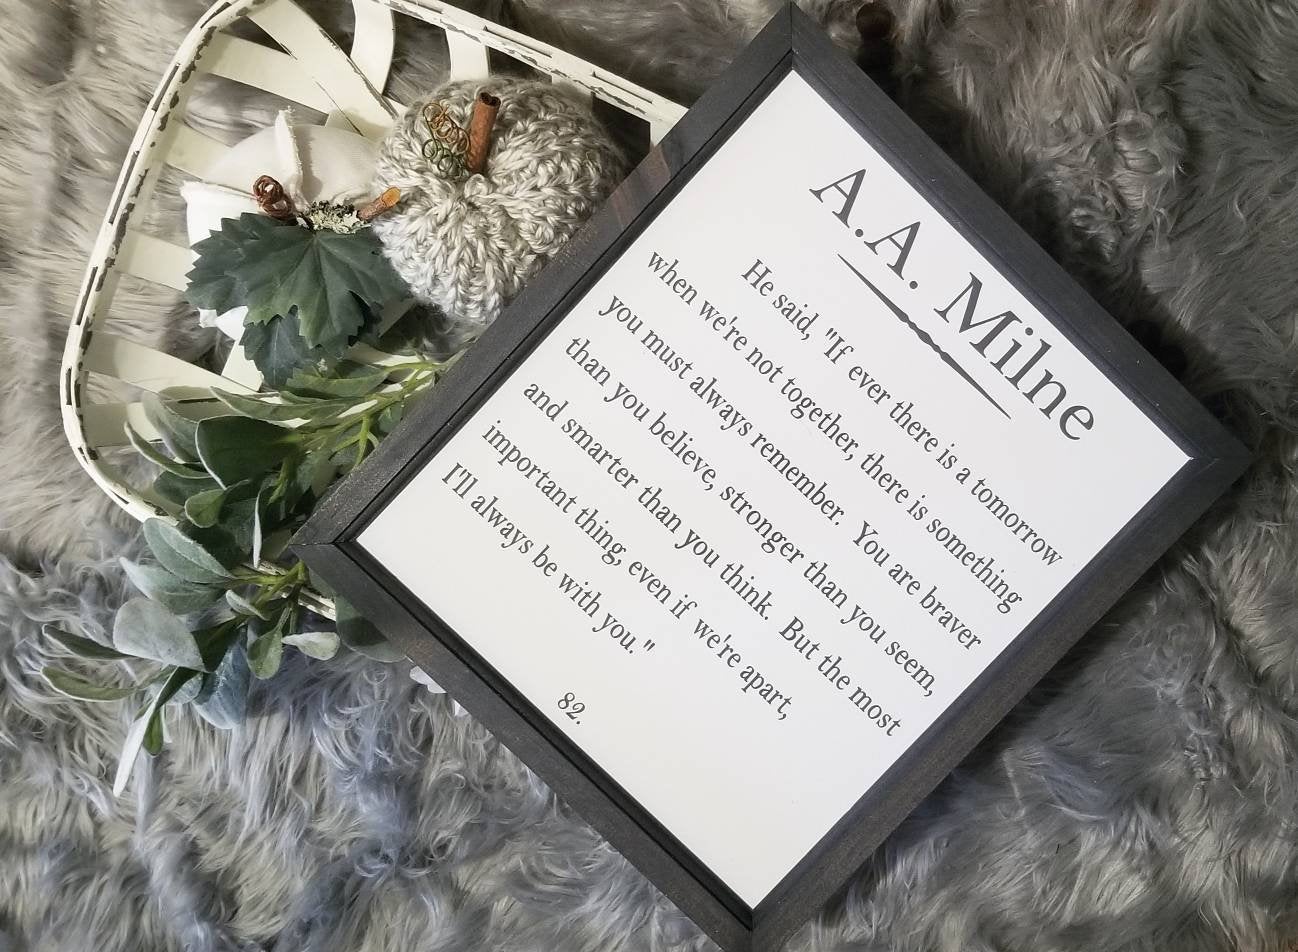 You are stronger than you think sign, Winnie the pooh sign, nursery decor, book quote, A.A. Milne, nursery sign, stronger braver smarter